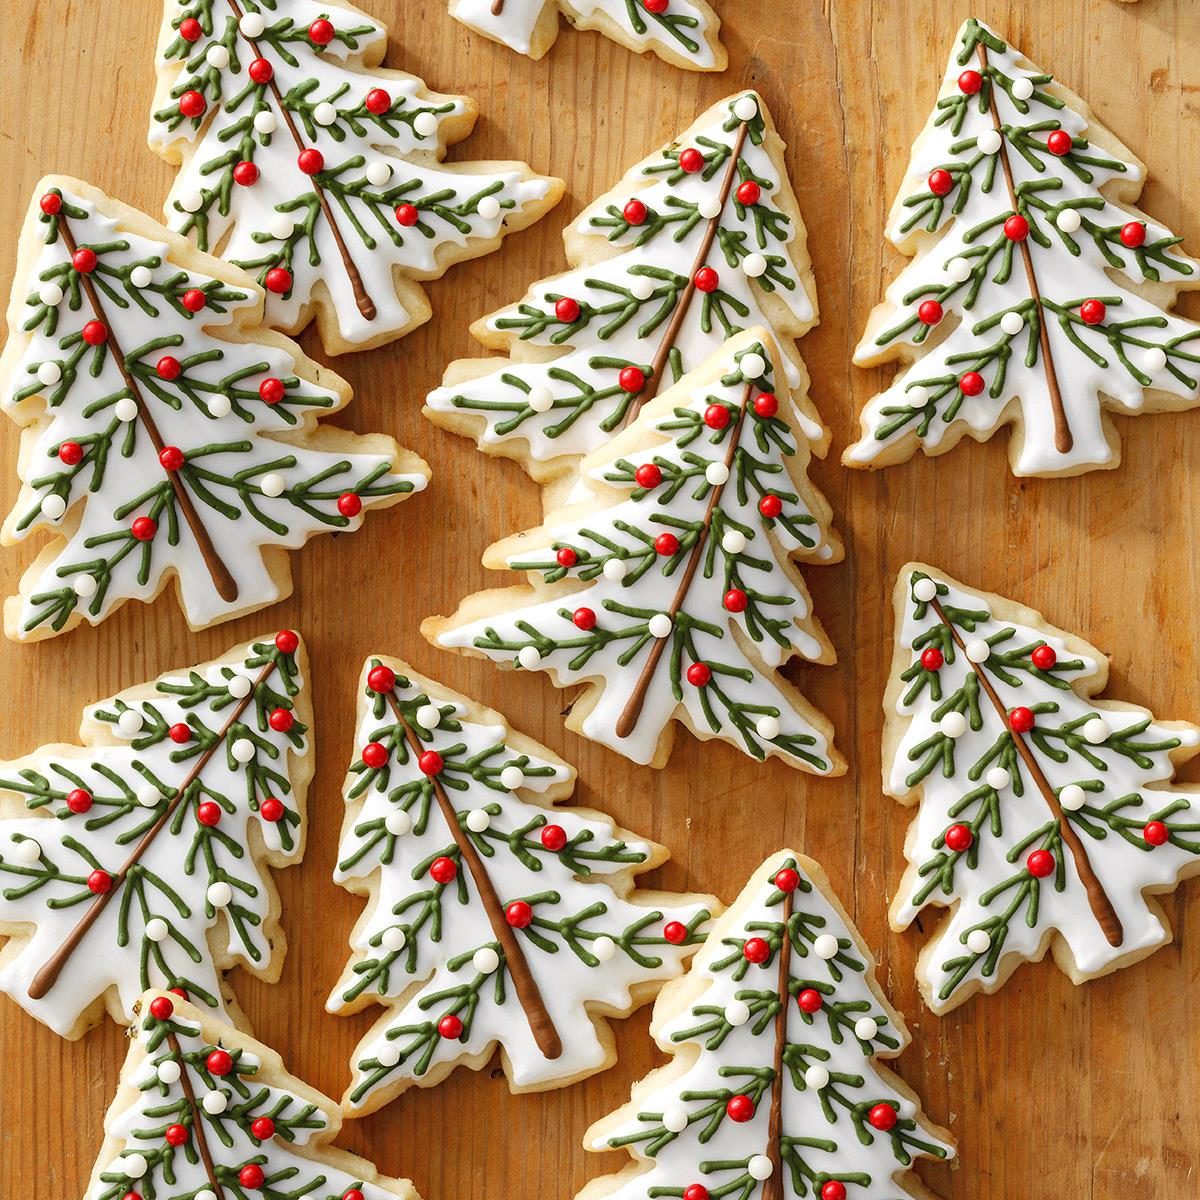 35+ Pictures Of Christmas Cookies 2021